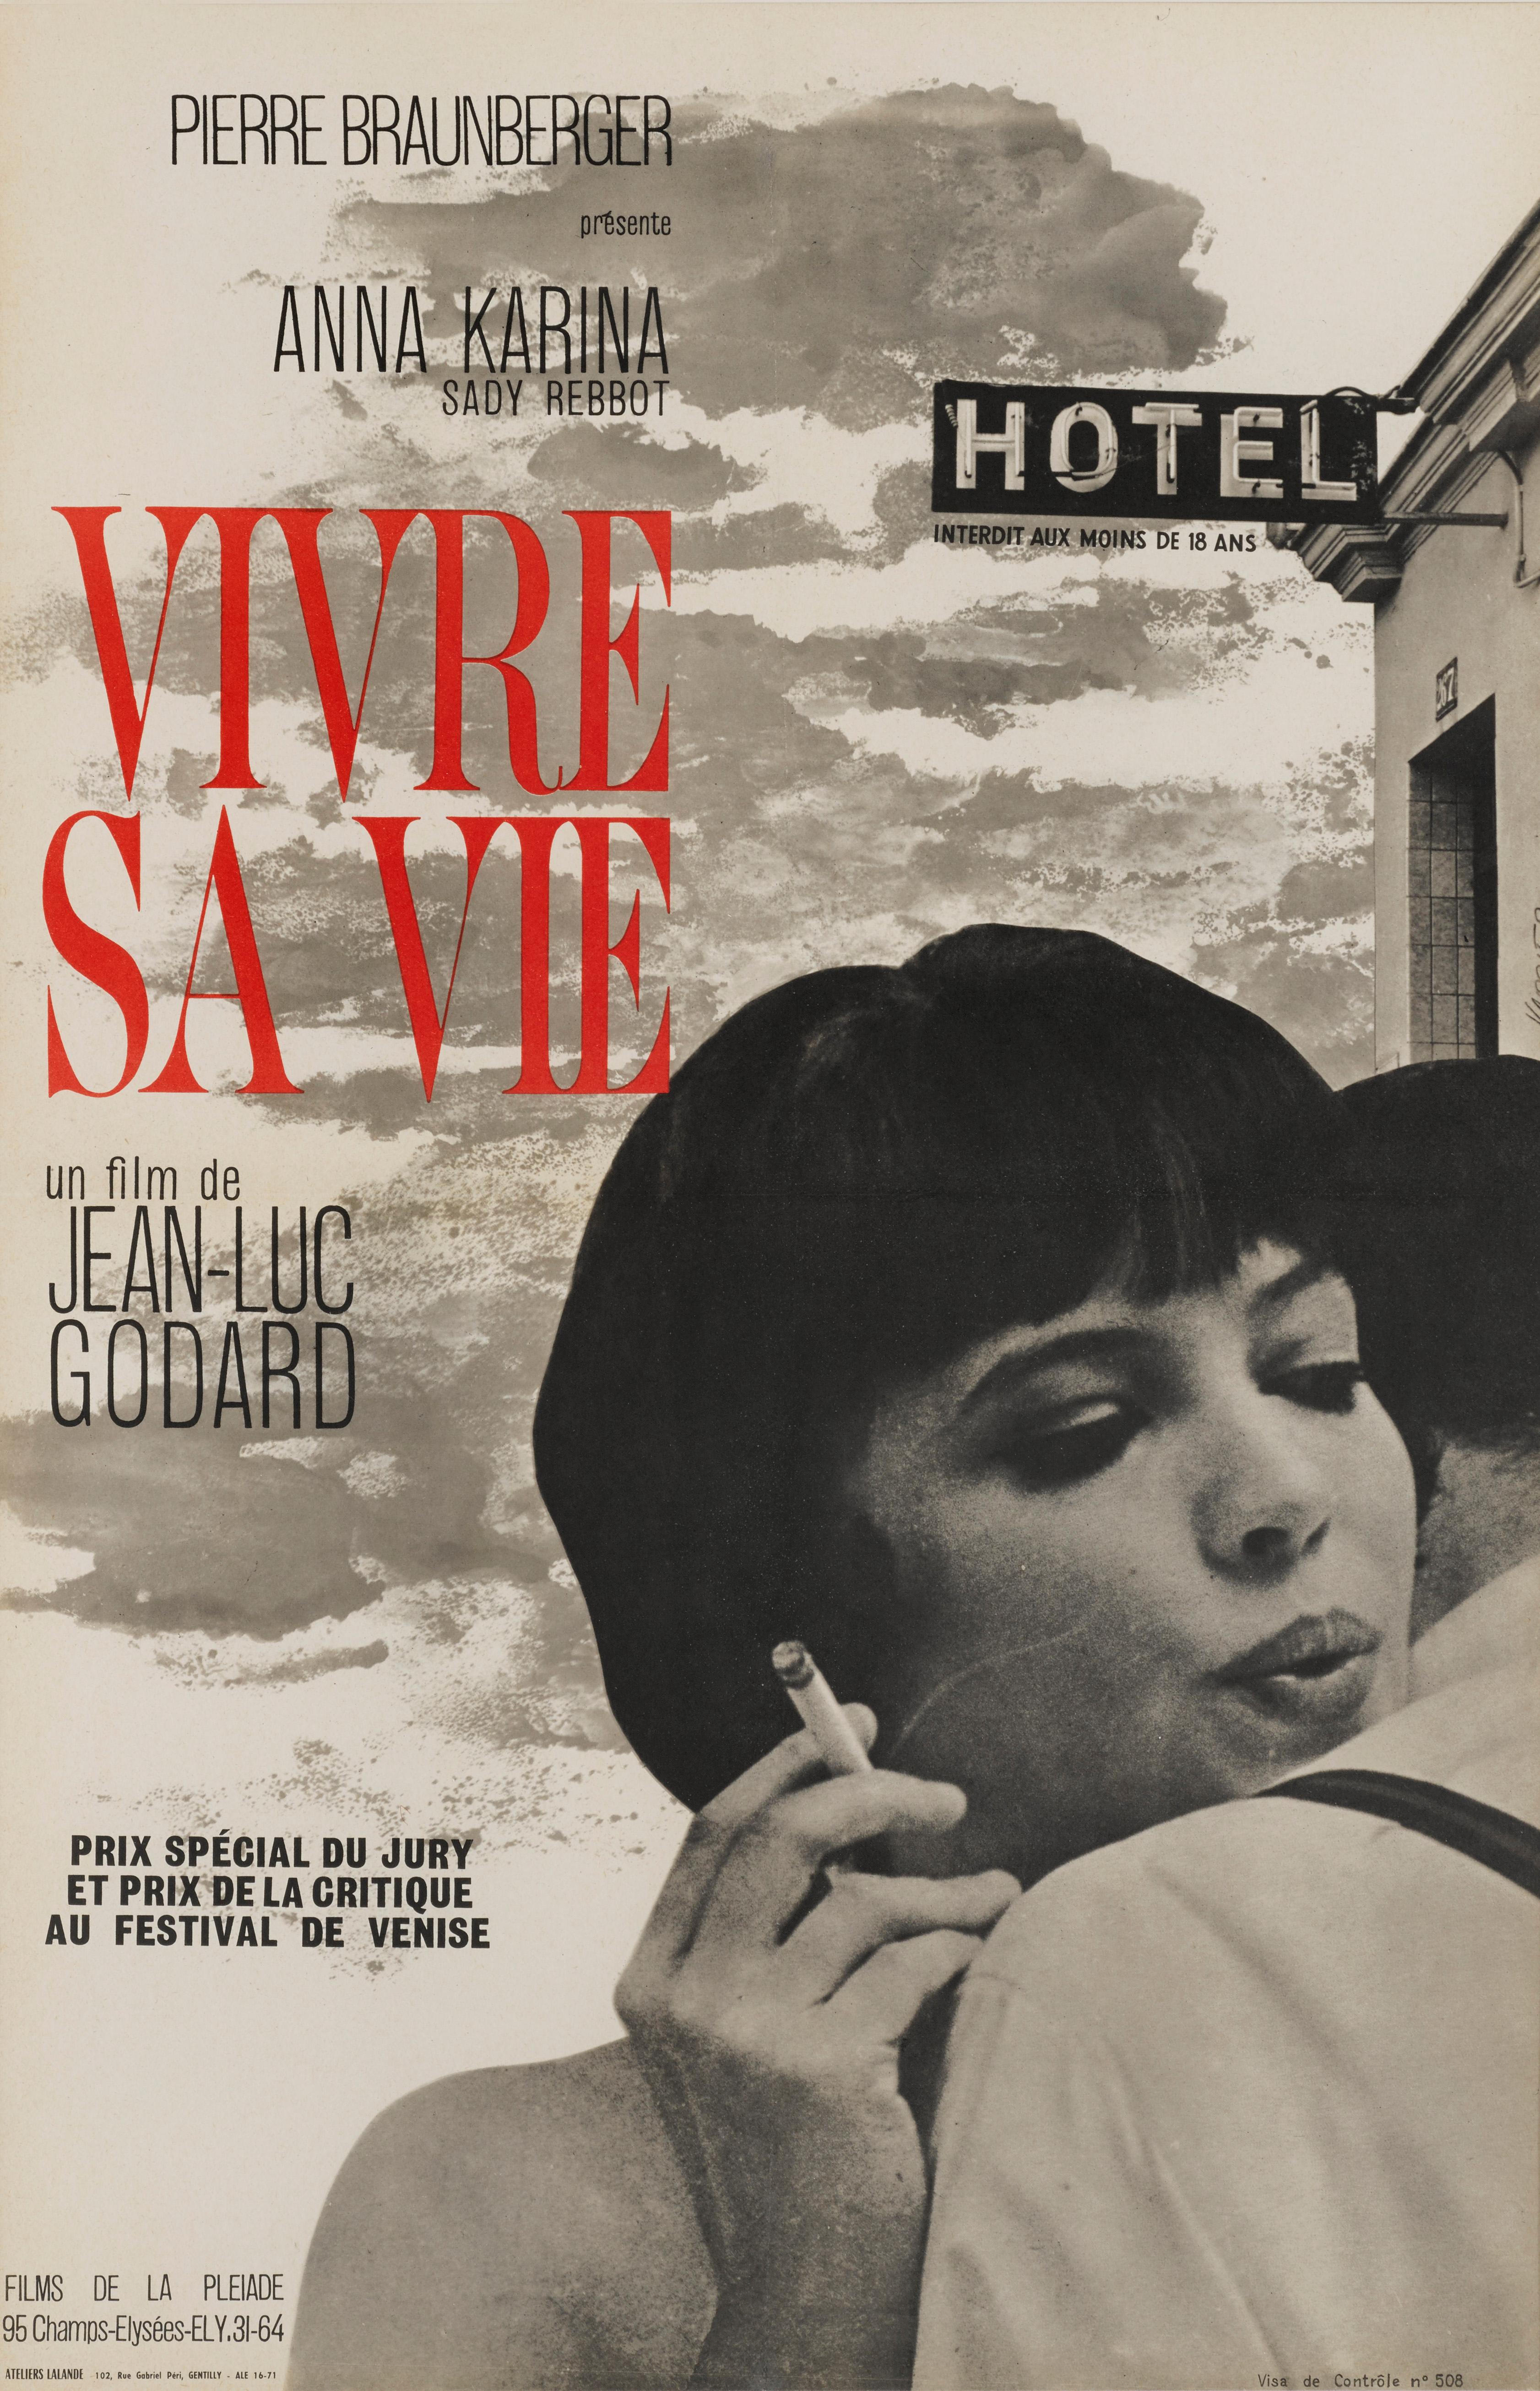 Original French movie poster for Jean-Luc Godard's classic French new wave
film from (1962) 
Susan Sontag, author and cultural critic, has described Godard's achievement in Vivre Sa Vie as 